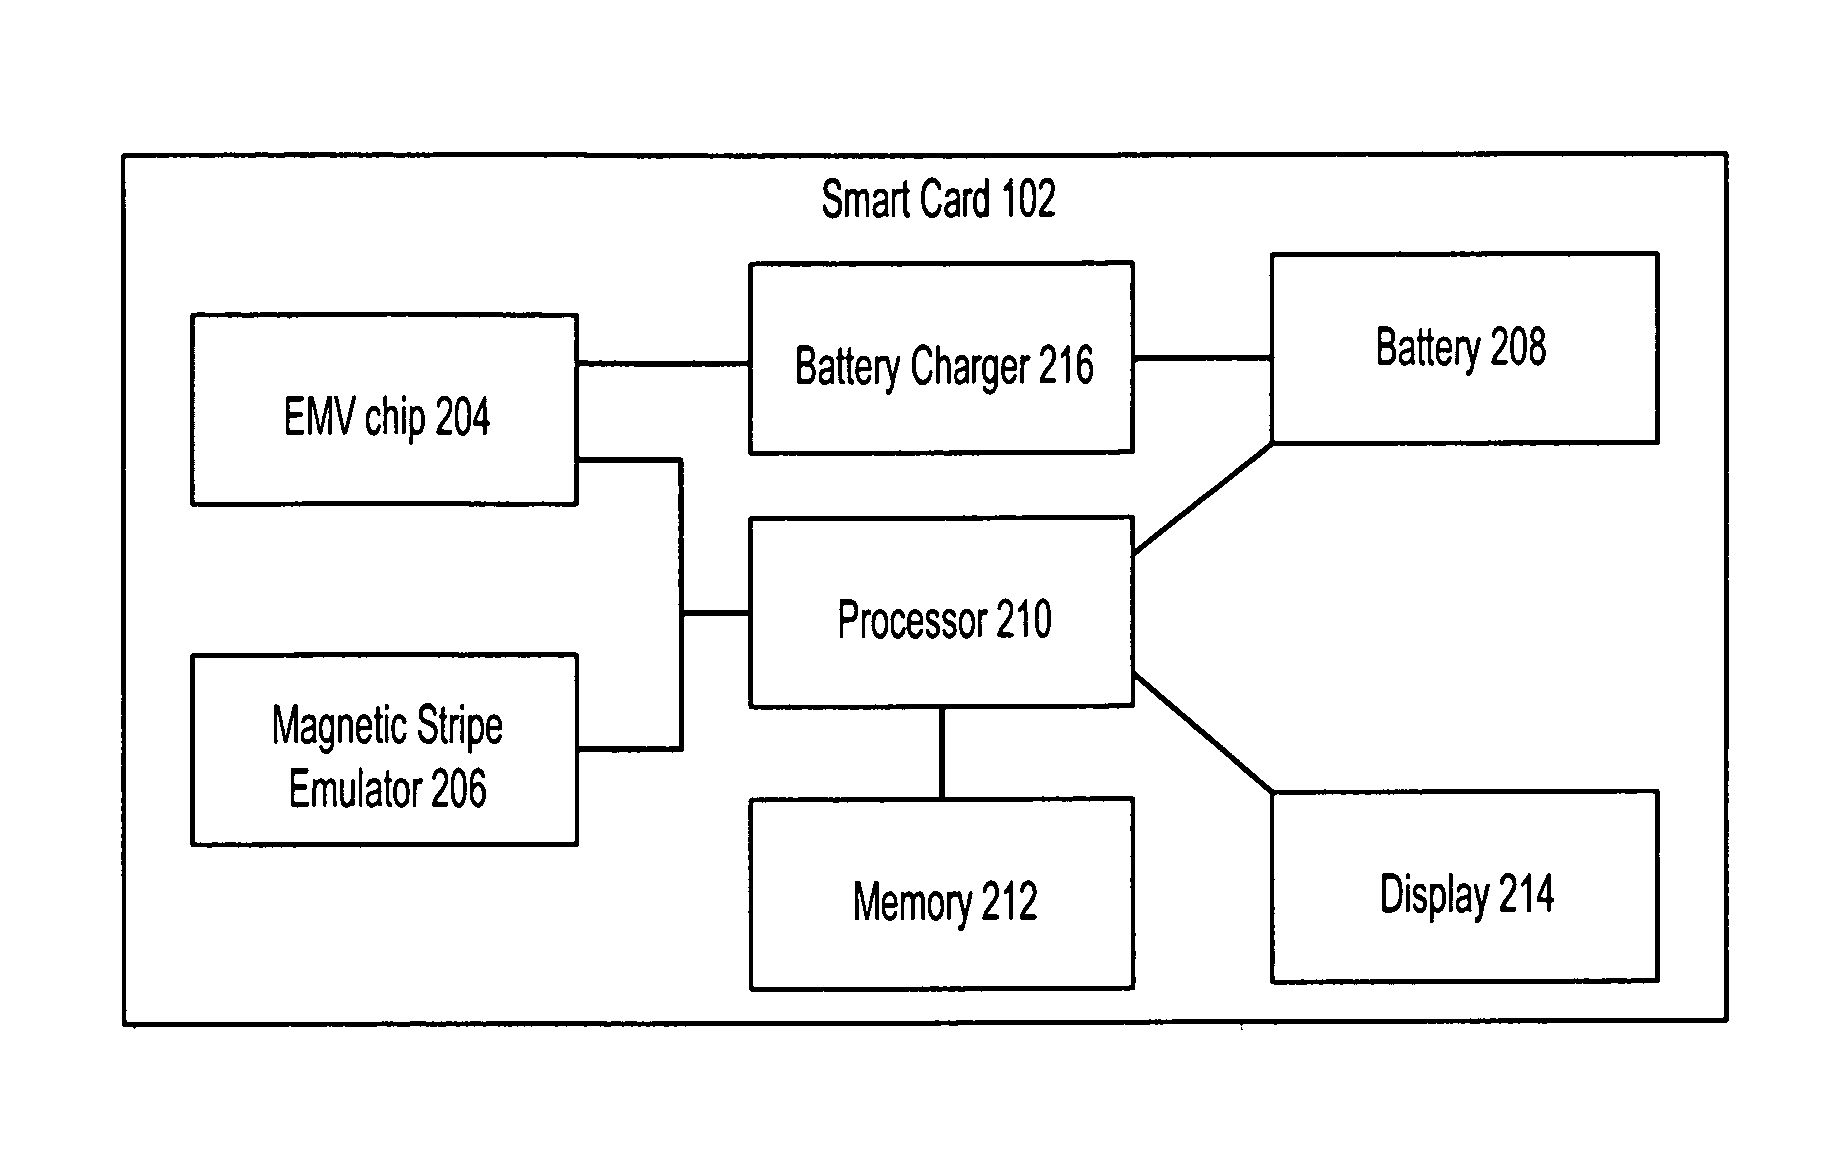 Smart card battery charging during card use